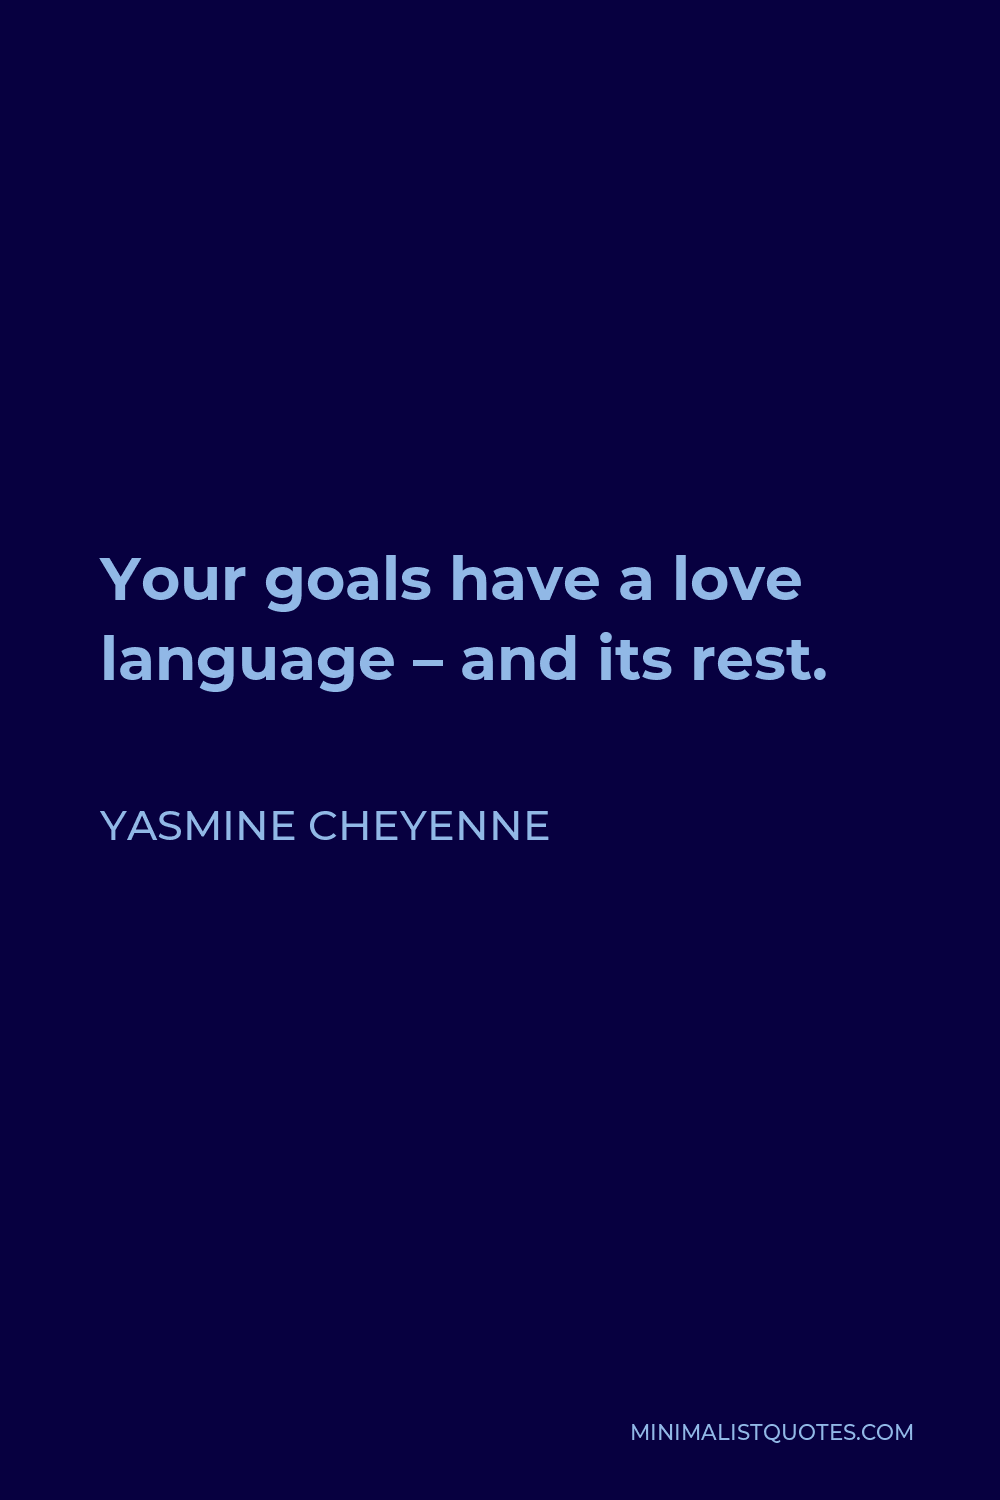 Yasmine Cheyenne Quote - Your goals have a love language – and its rest.